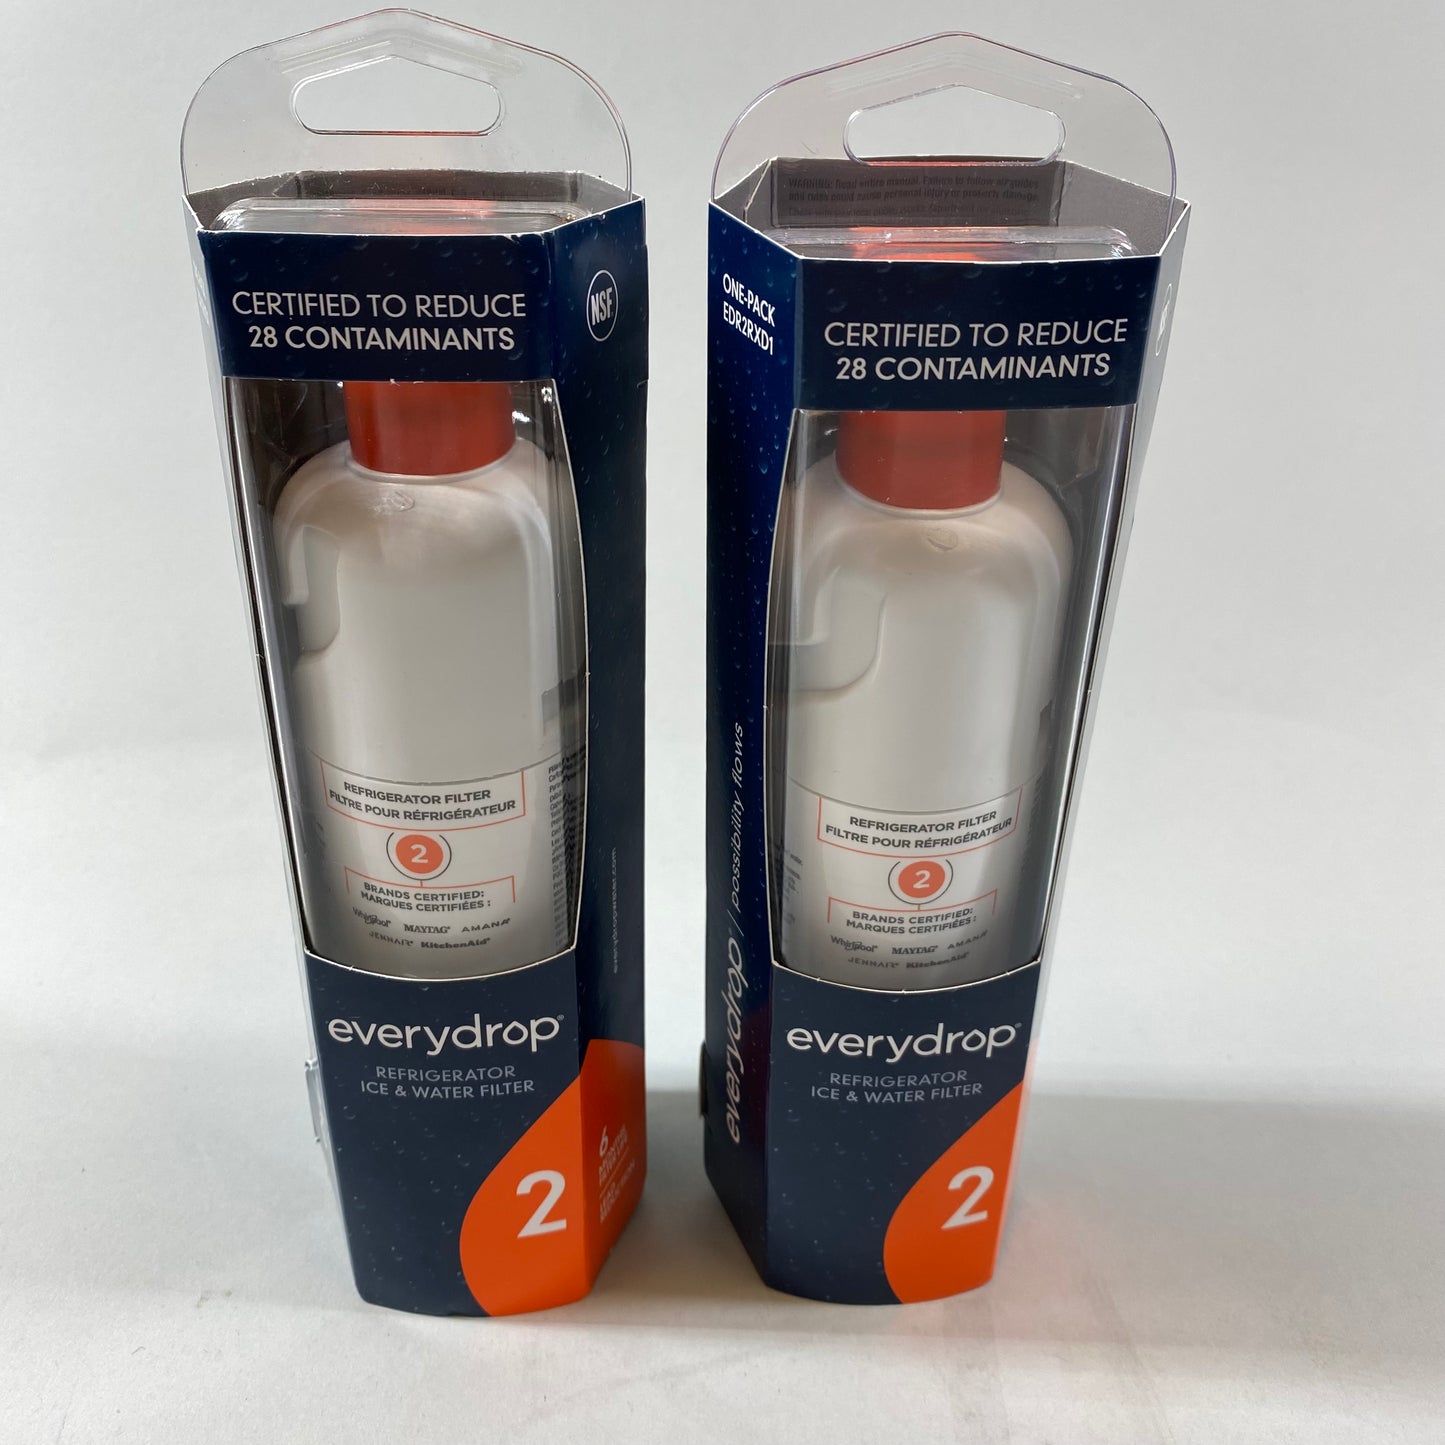 Lot of 2 - Everydrop Refrigerator Ice & Water Filter EDR2RXD1